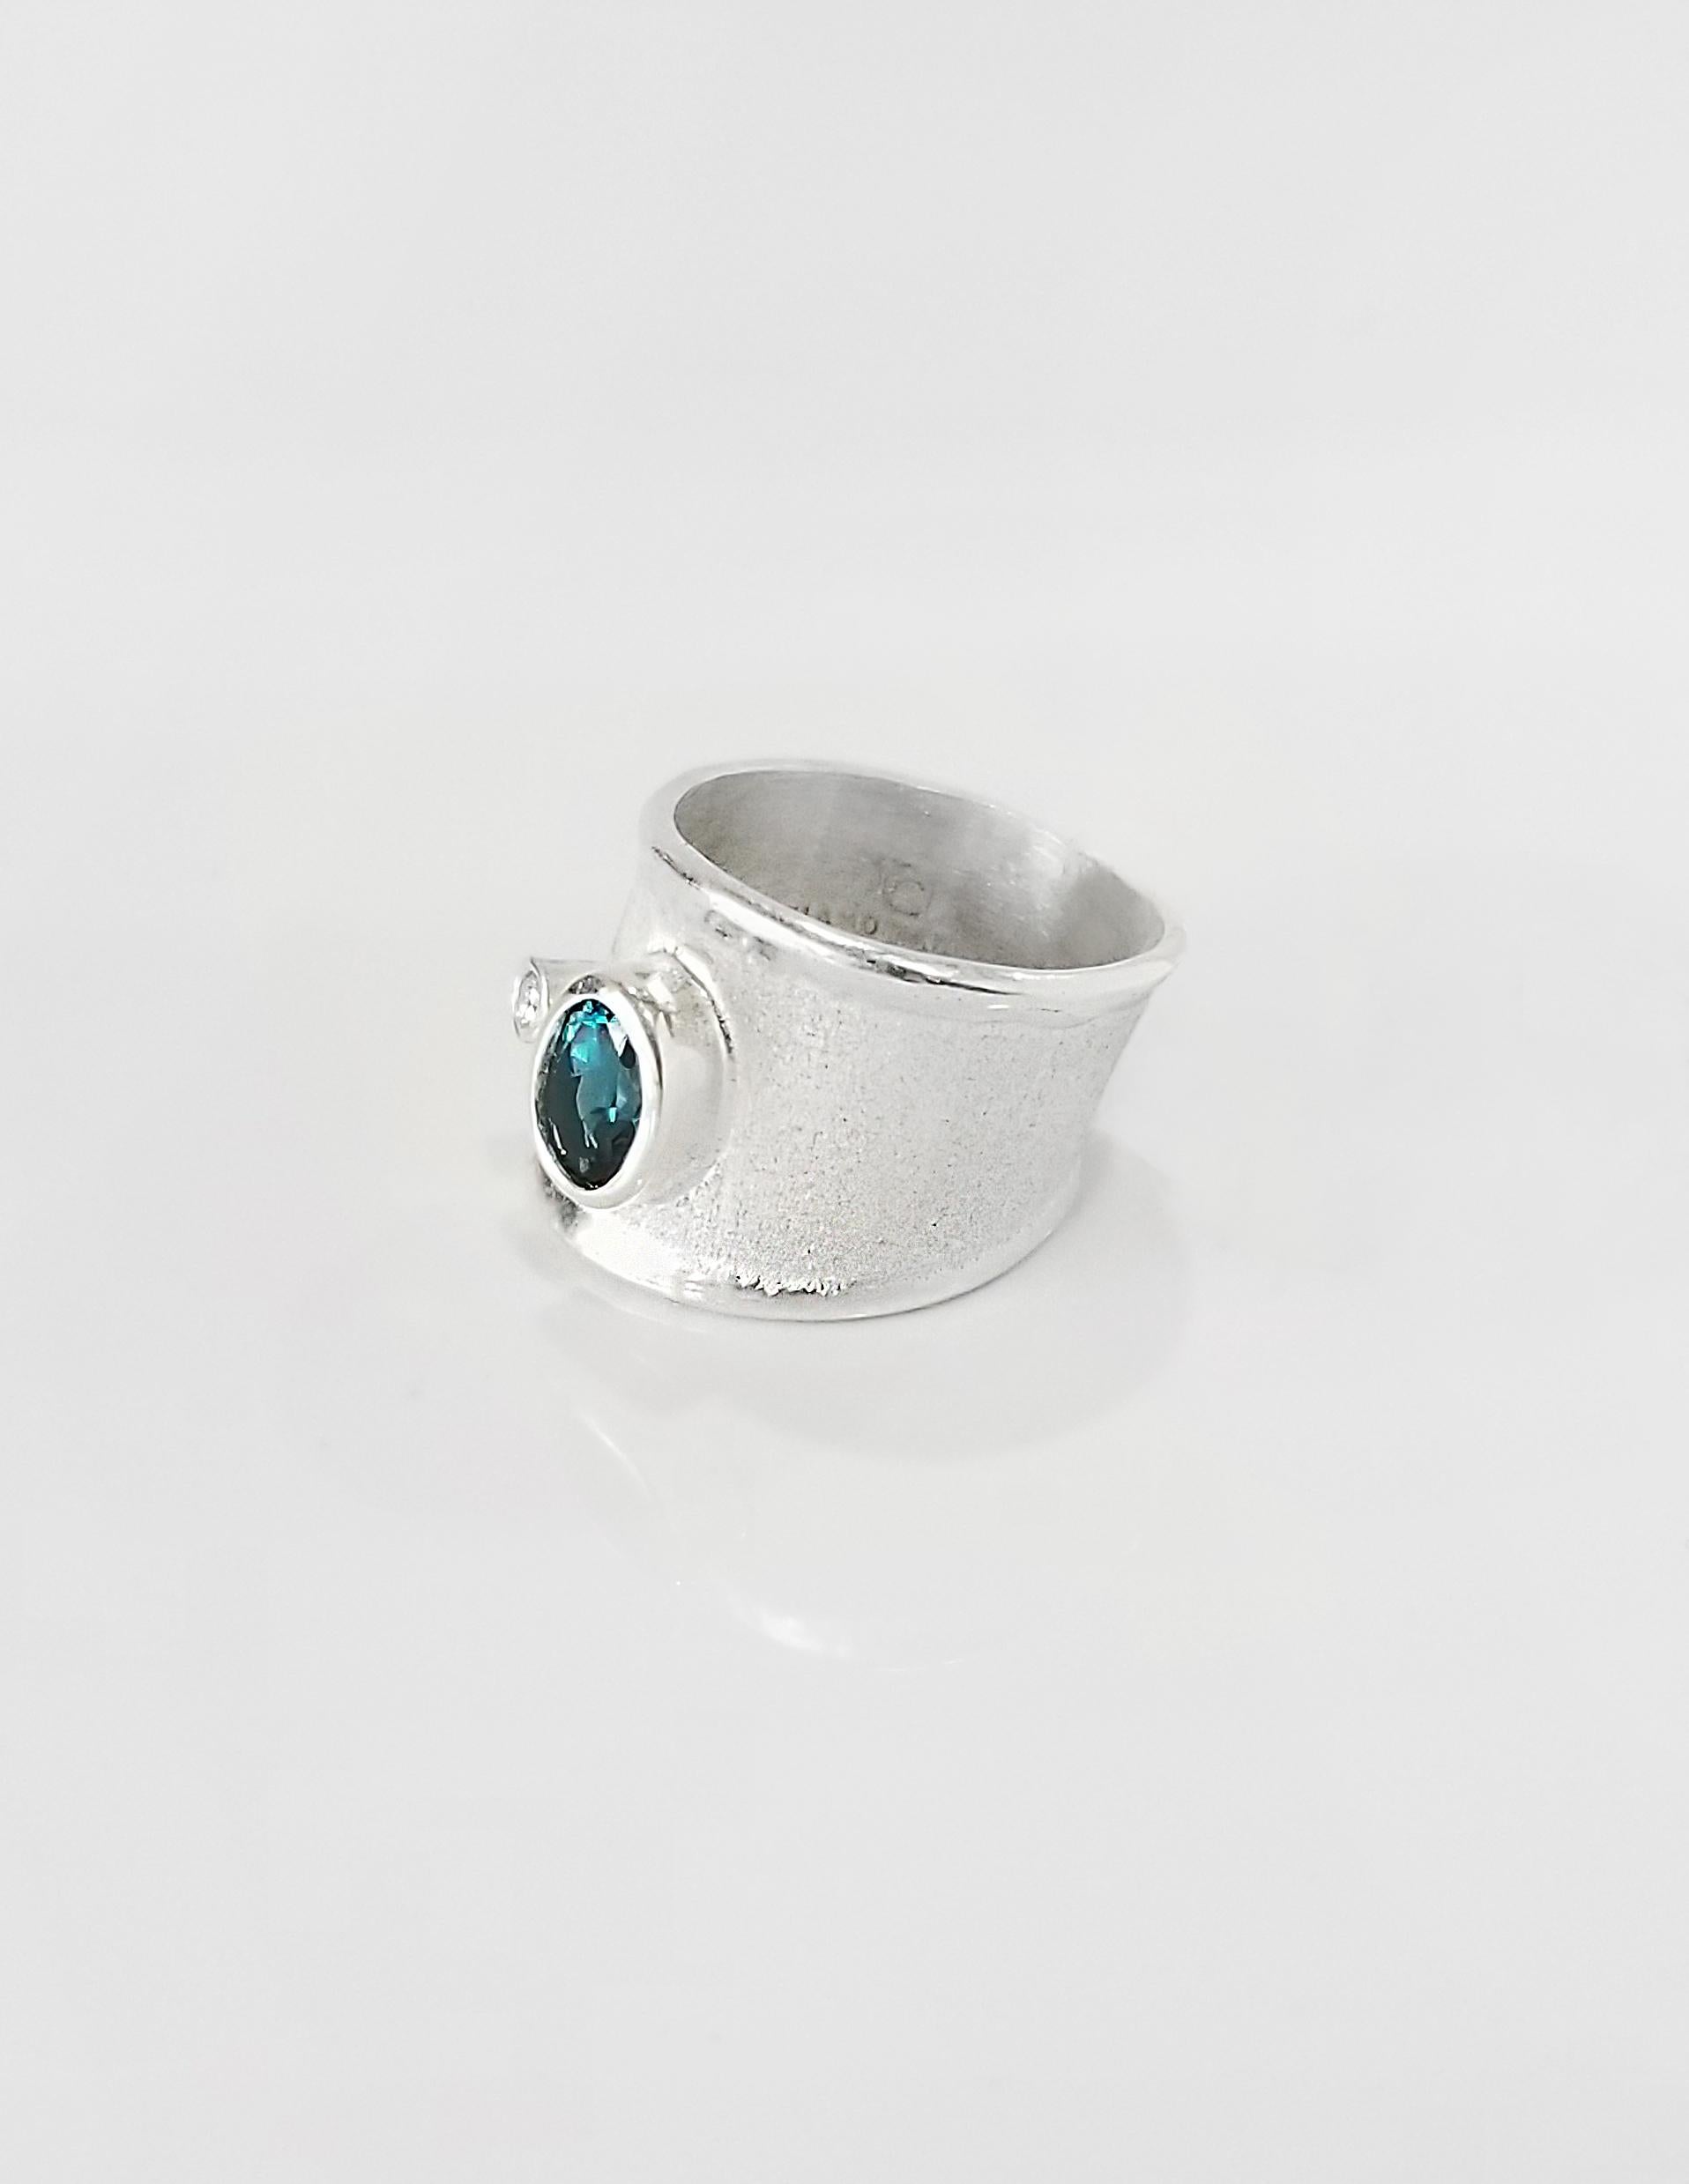 Yianni Creations Ammos Collection handcrafted artisan ring from fine silver 950 purity plated with palladium to resist the elements. This ring is featuring 1.10 Carat London Blue Topaz accompanied by 0.03 Carat Brilliant Cut White Diamond